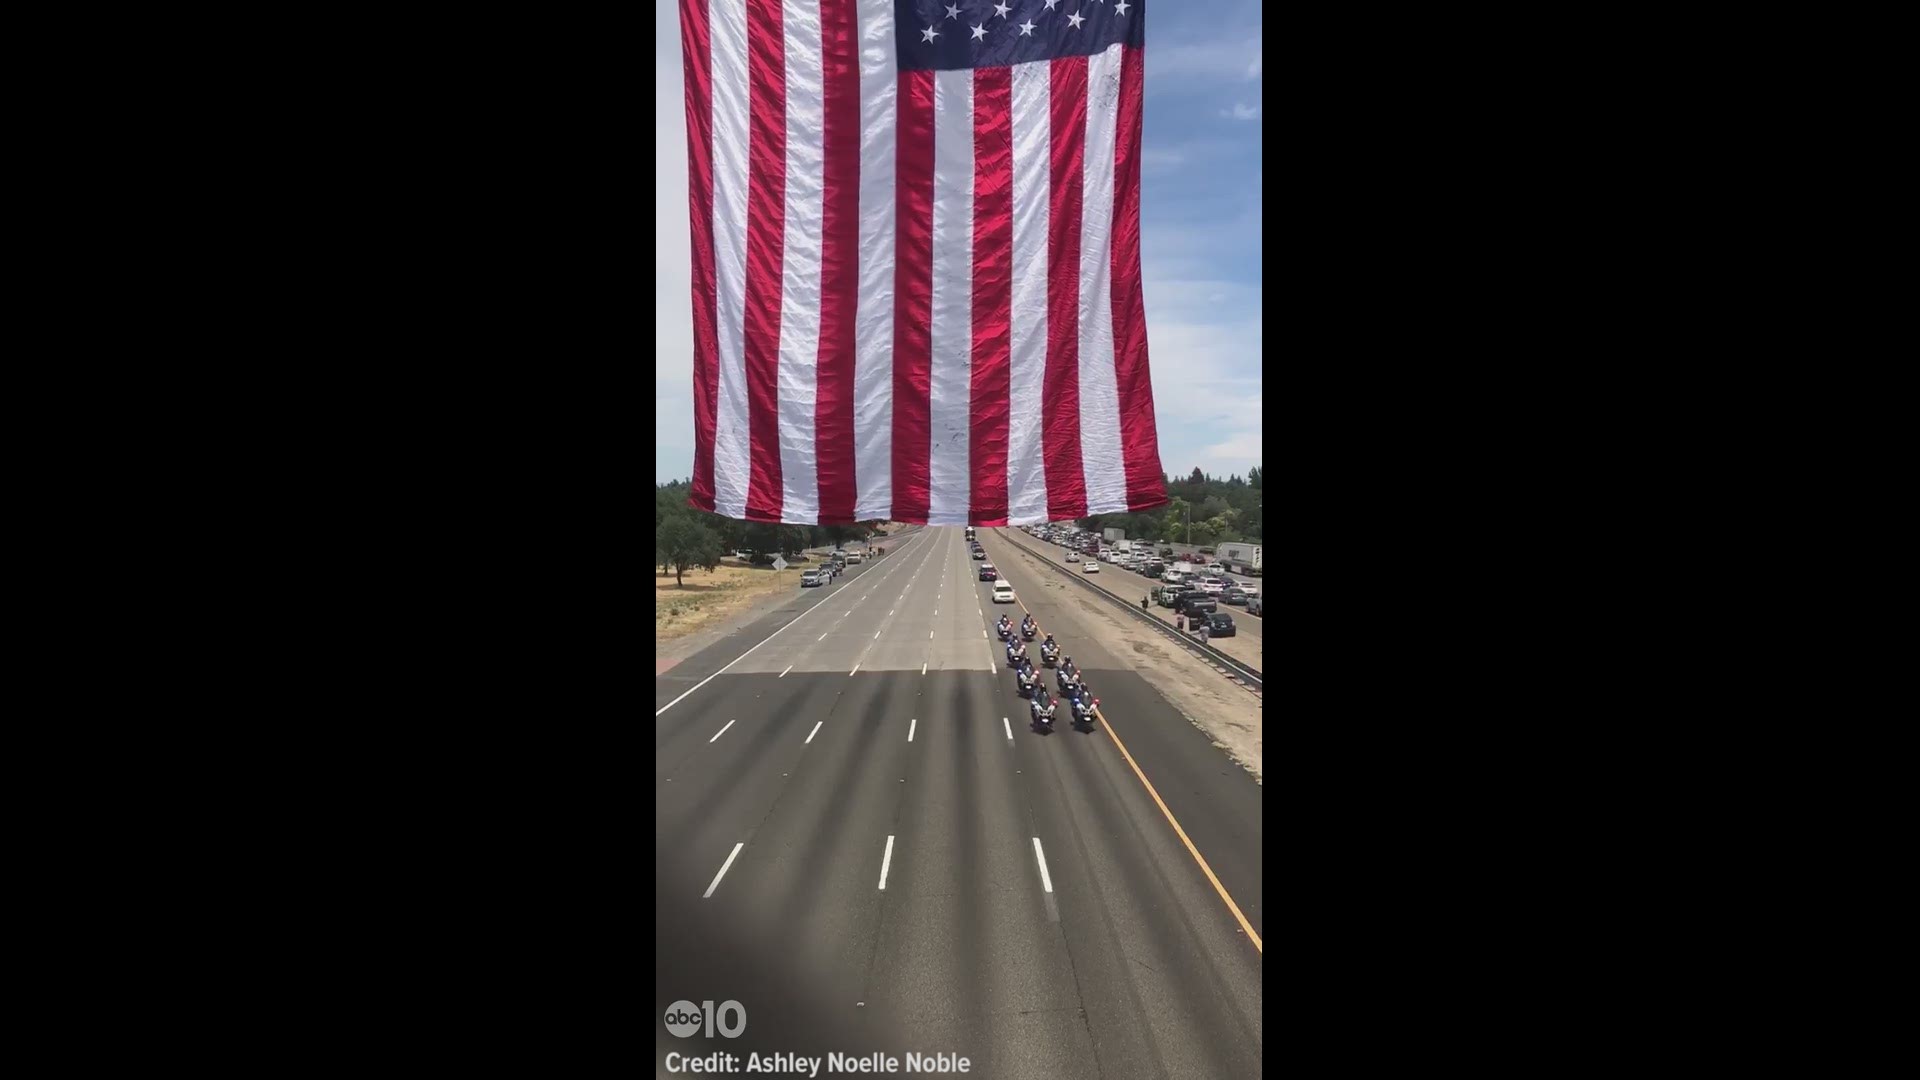 As motorcycles, patrol cars and a hearse drive to Officer O'Sullivan's final resting place in Elk Grove, the procession passes under an overpass on Greenback Lane in Citrus Heights, as the American Flag waves slowly in the wind. 

ABC10 Viewer Ashley Noelle Noble sent us this video of the memorial procession for Fallen Officer Tara O'Sullivan.